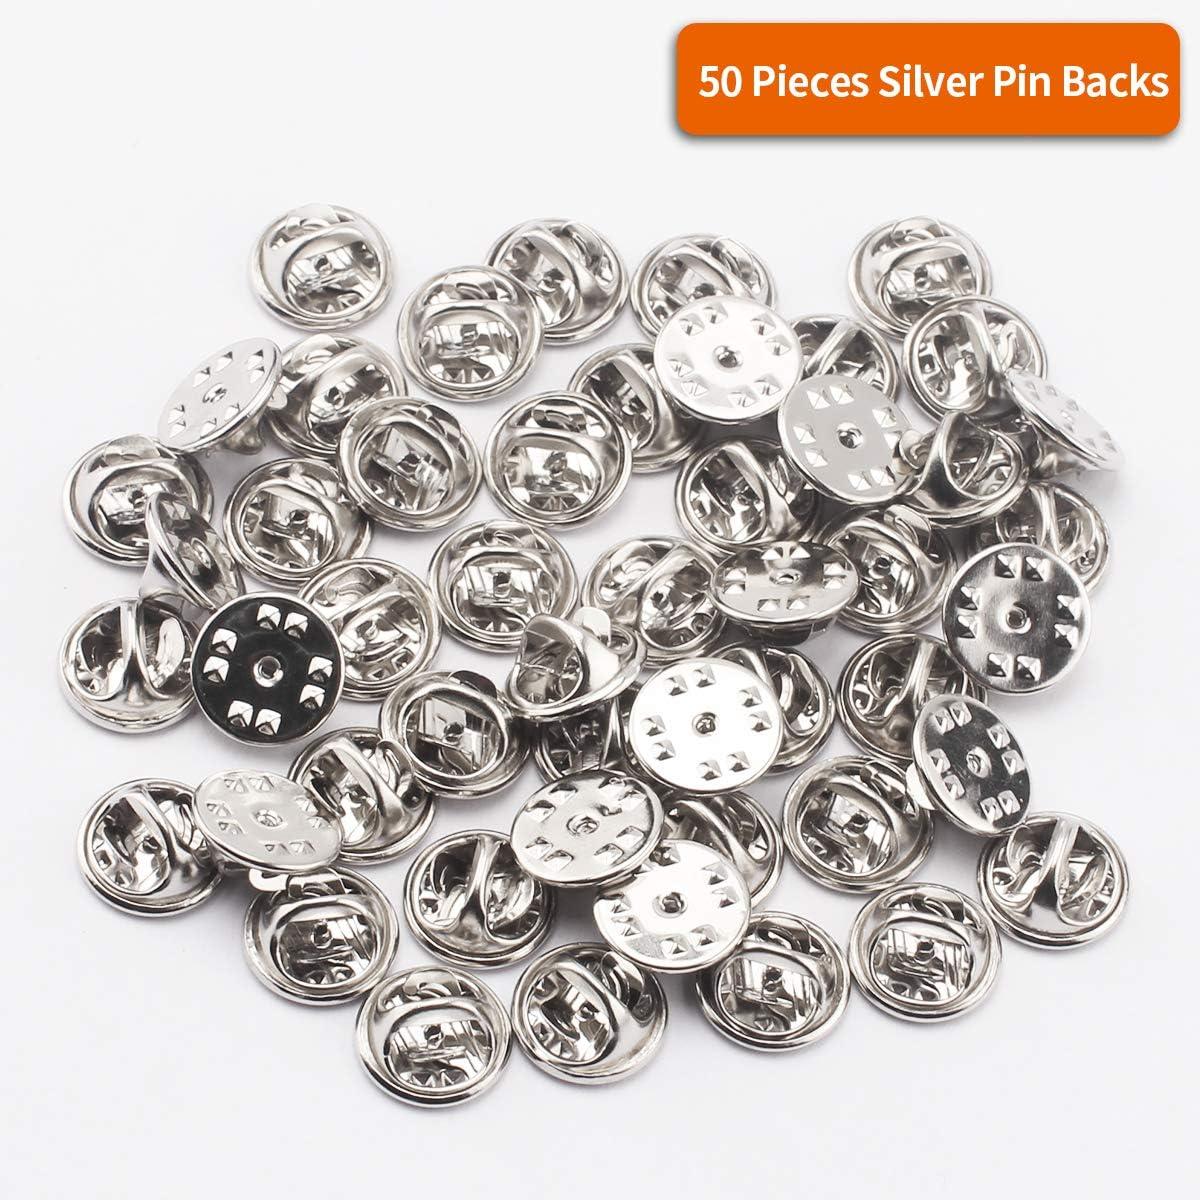 50 Pieces Pin Backs Sliver Lapel Pin Backs Butterfly Clutch Pin Backs  Replacement Metal Enamel Pin Backing for Craft Making